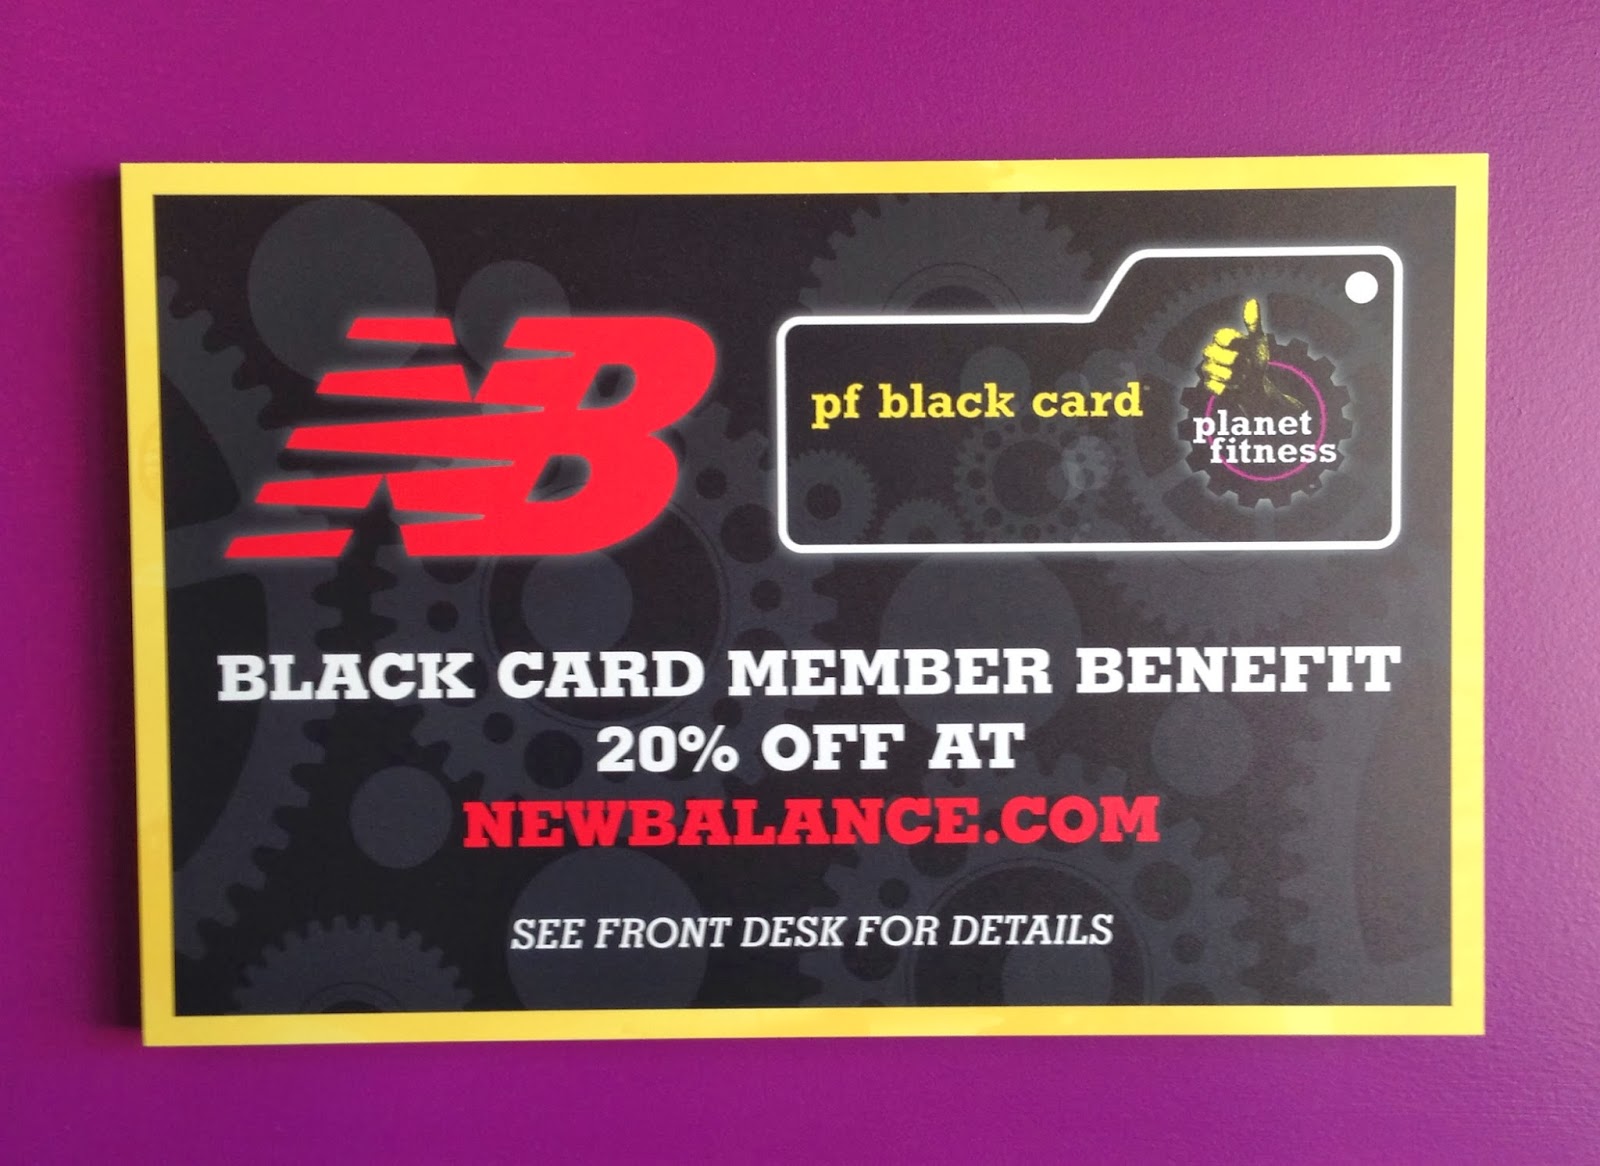 Simple Is Tanning Free At Planet Fitness With A Black Card for Women